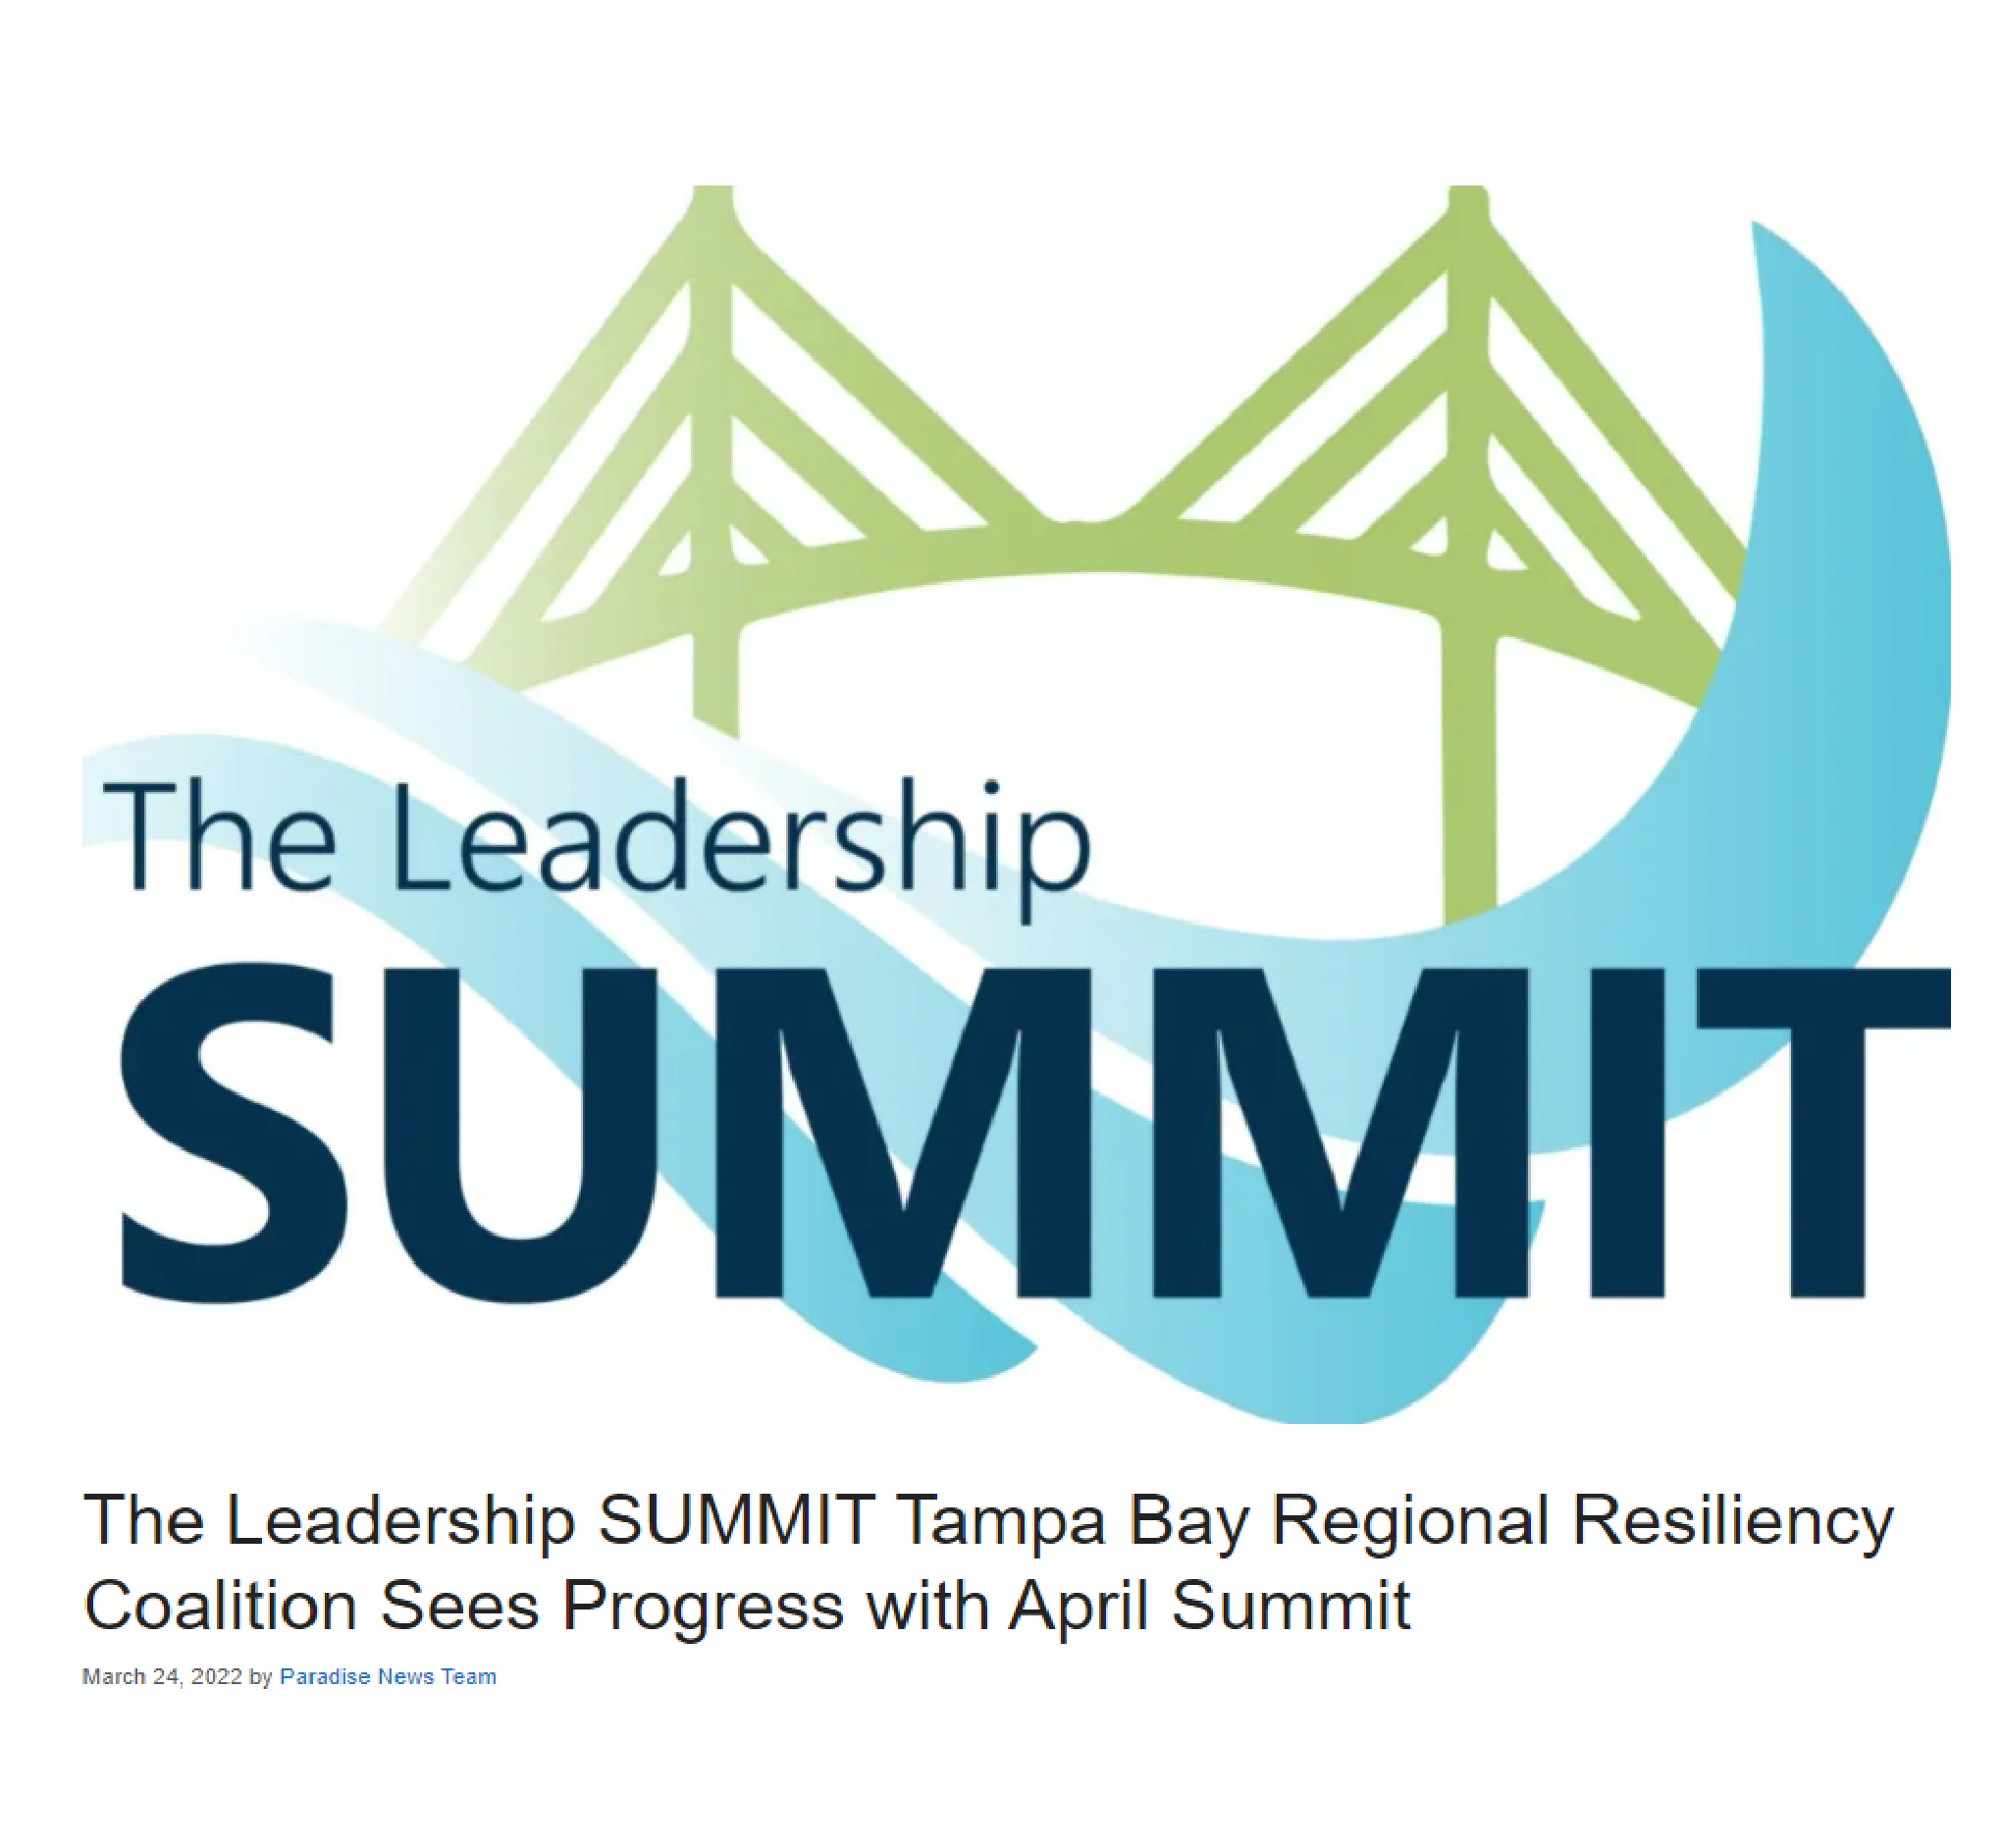 The Leadership SUMMIT Tampa Bay Regional Resiliency Coalition Sees Progress with April Summit